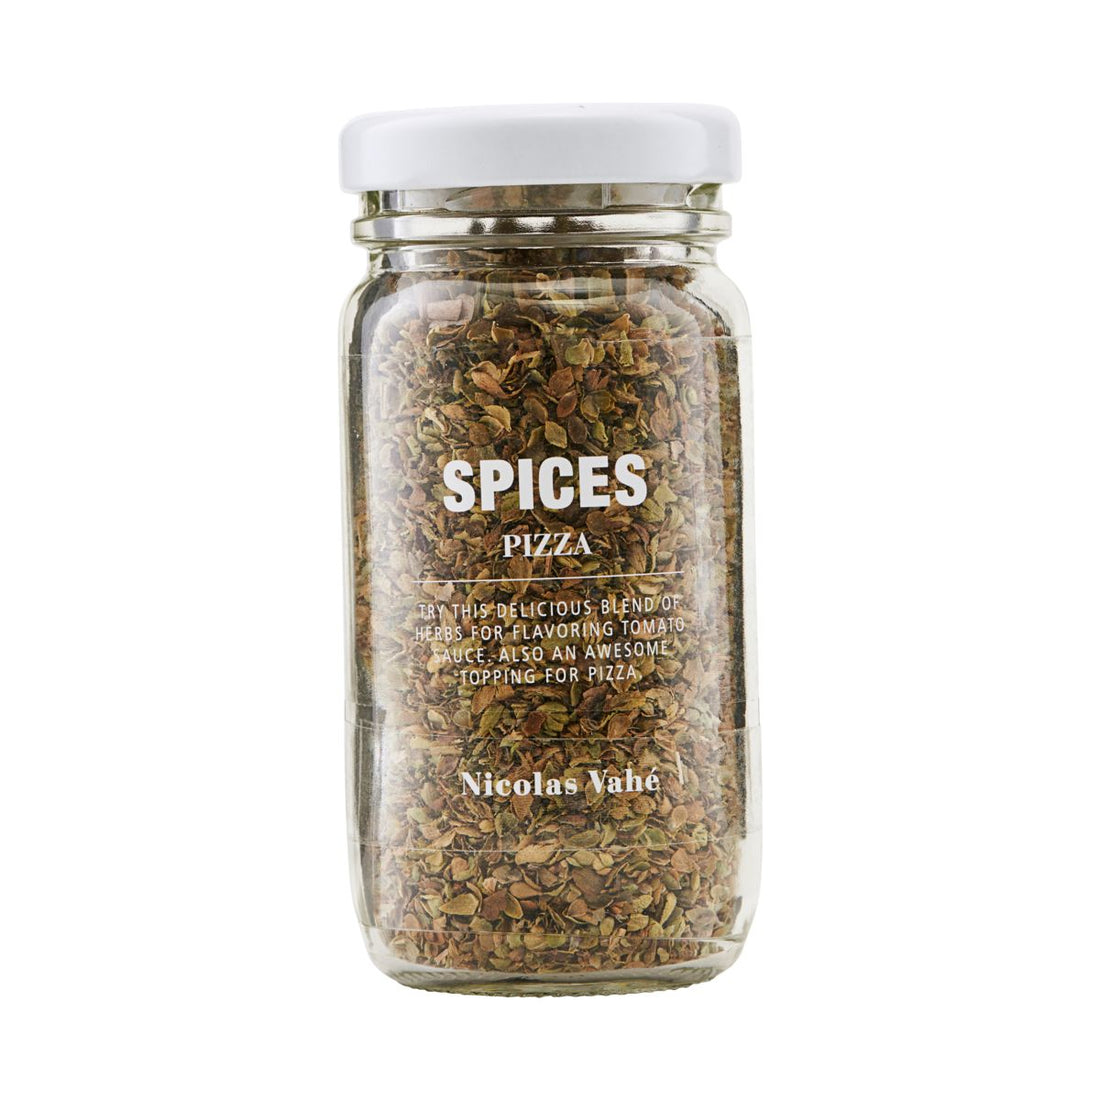 SPICE MIX FOR PIZZA